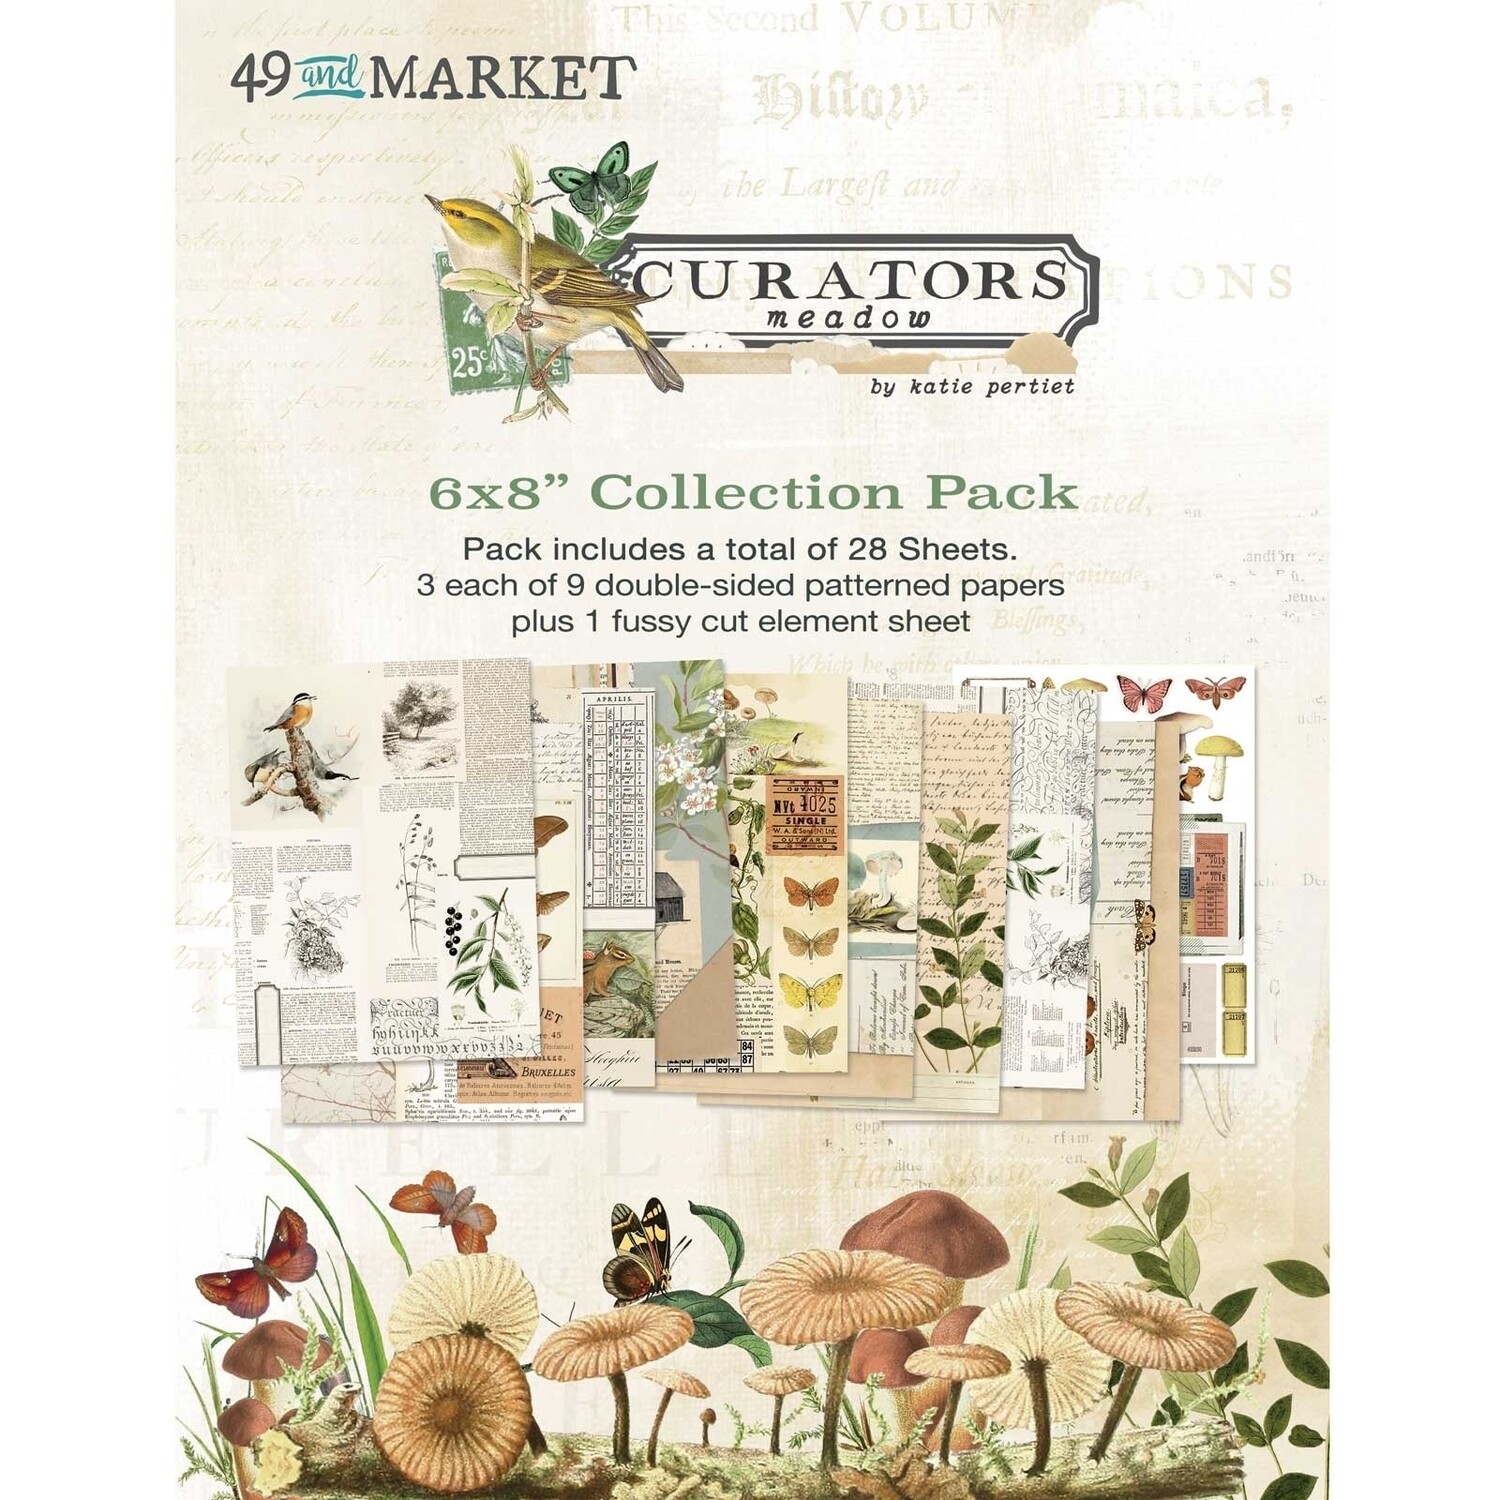 Curators Meadow 6x8 Collection Pack